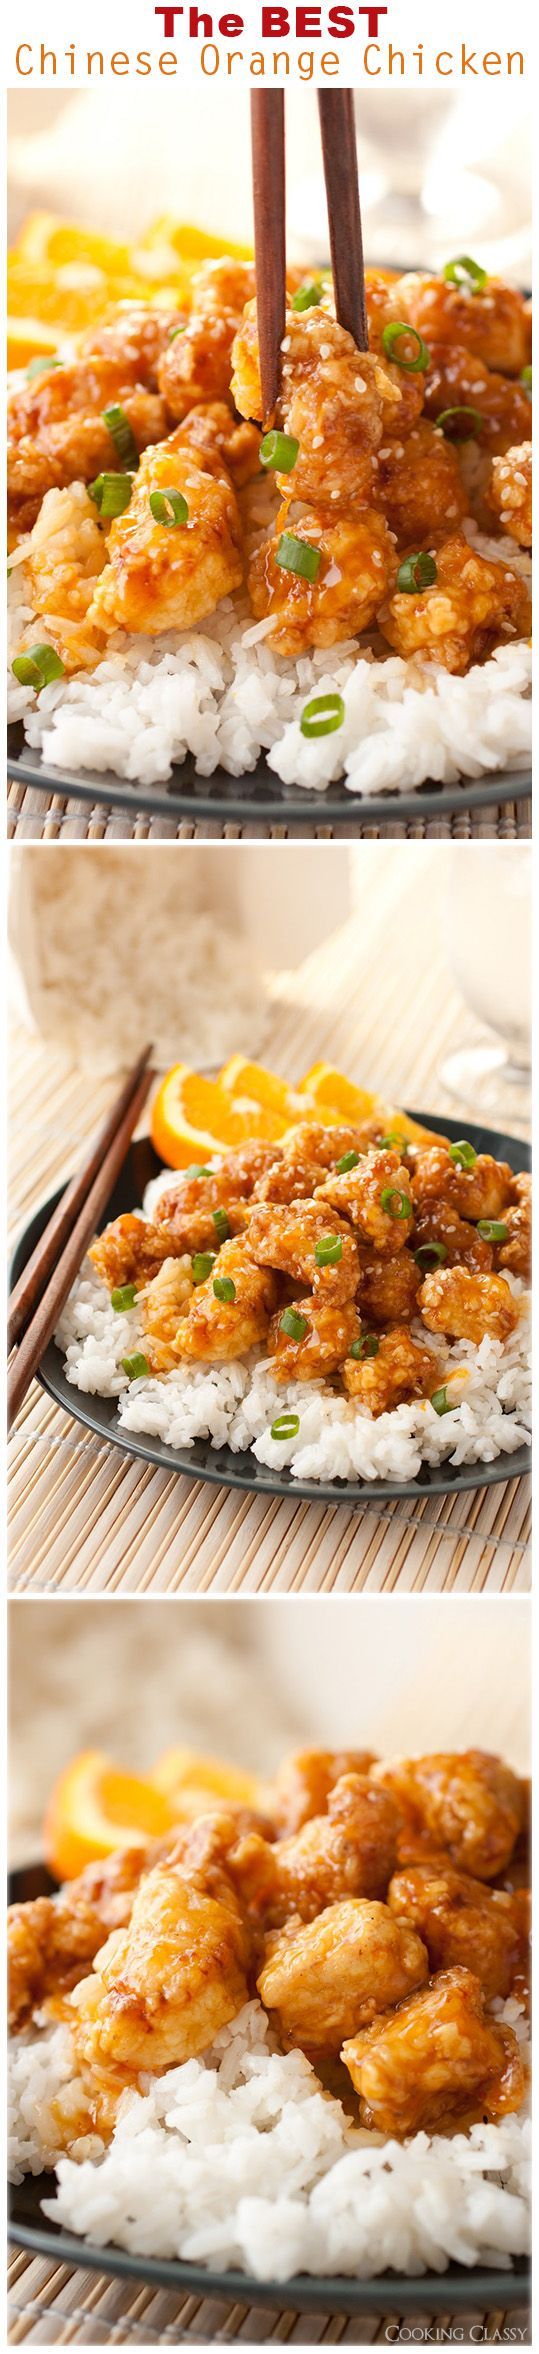 Chinese Orange Chicken – this is no doubt the BEST orange chicken I’ve ever had! It has gotten rave reviews!